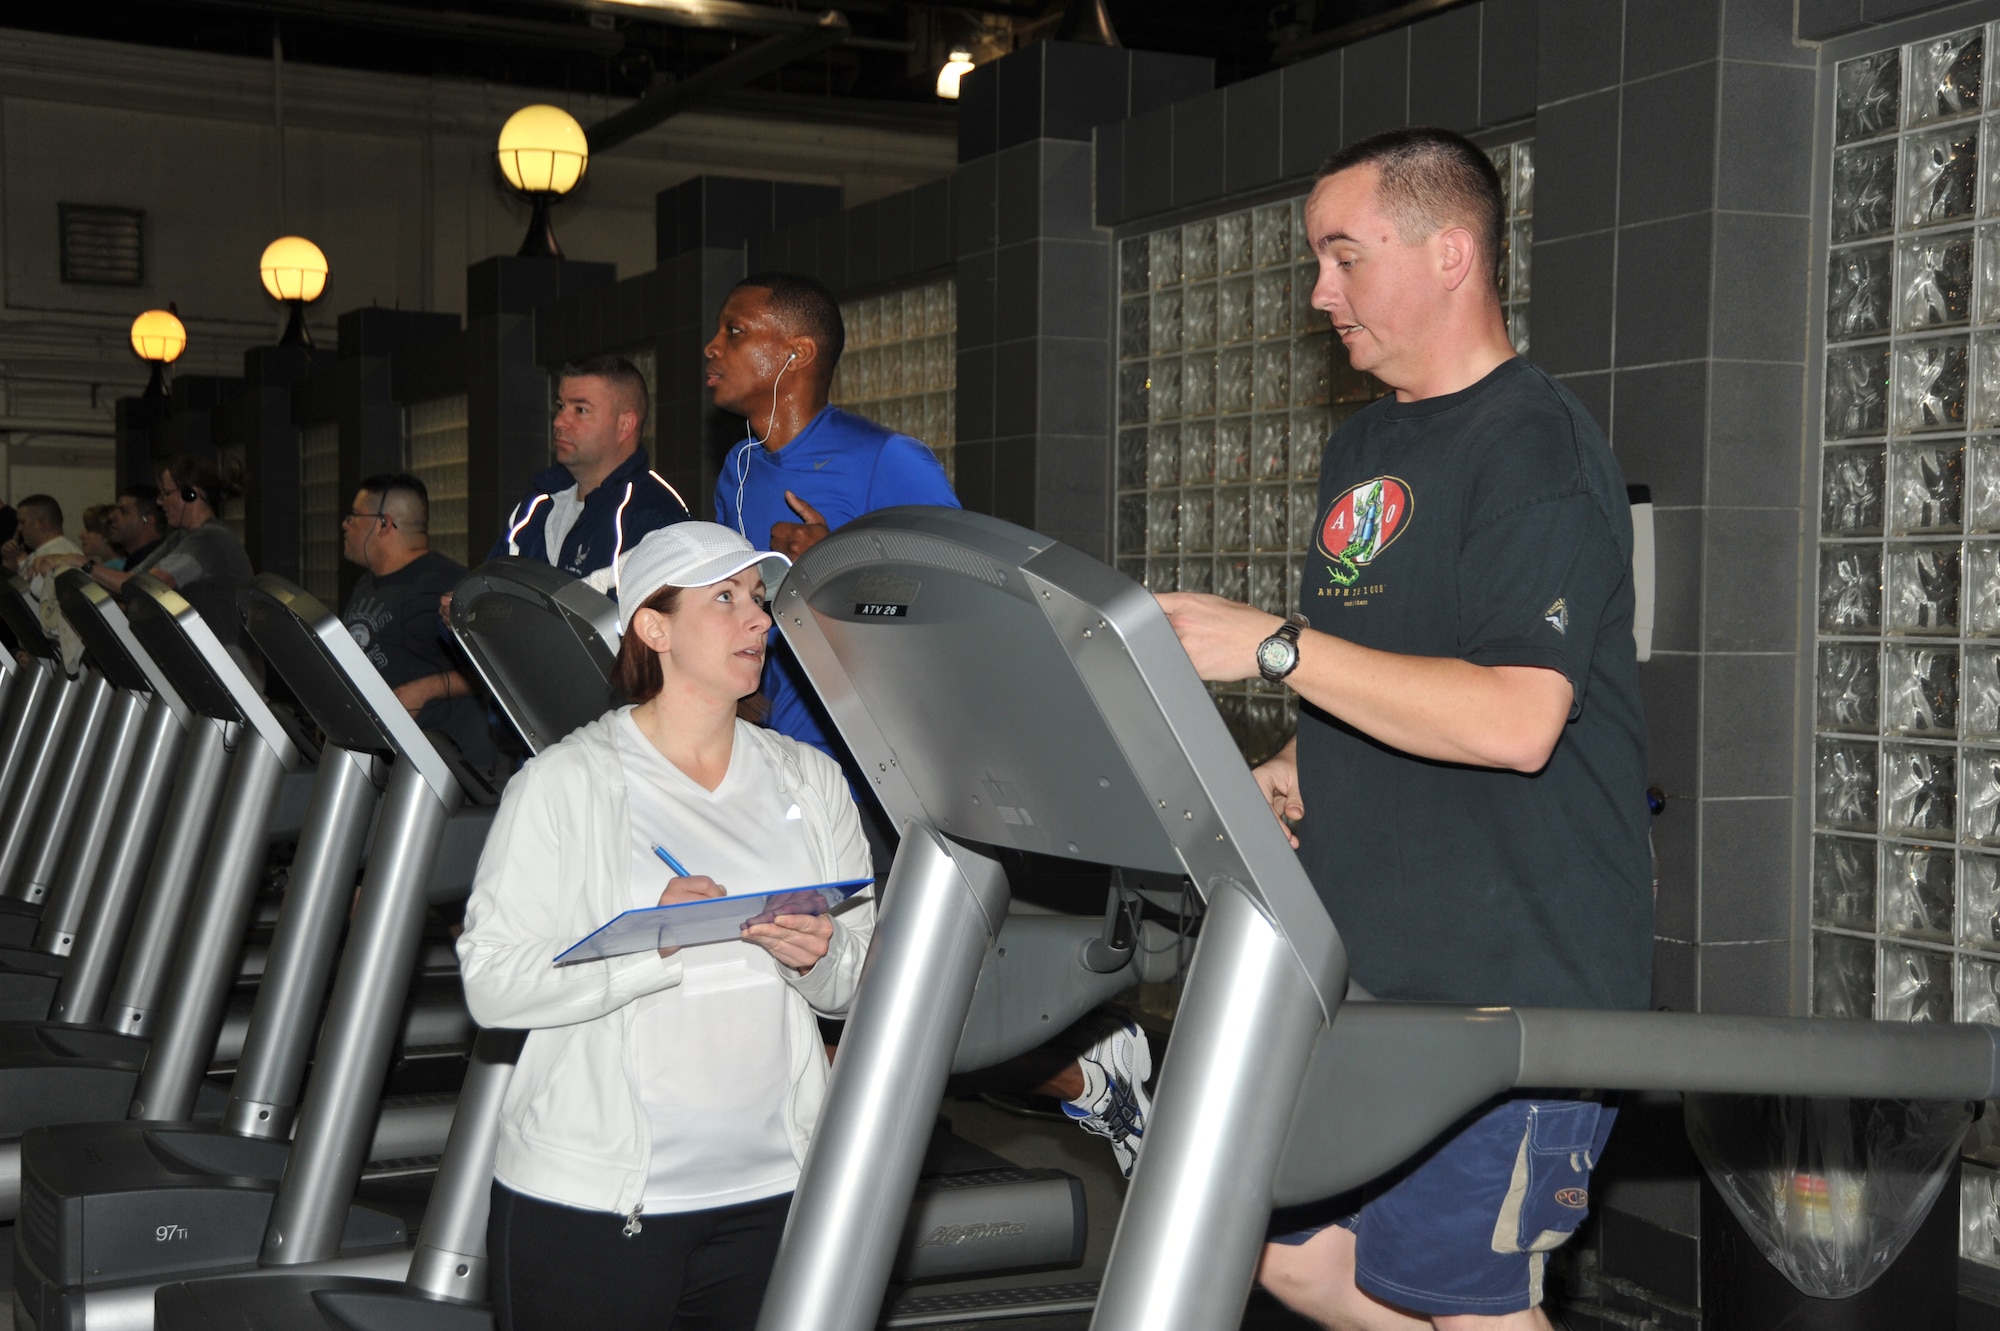 OFFUTT AIR FORCE BASE, Neb. - Marcy Jameson, HAWC Flight Chief & Exercise Physiologist, talks with Senior Airman Justin Speck of the 55th Logistic Readiness Squadron. Airman Speck was a participant in the Get Fit Run class at the Offutt Field House. U.S. Air Force photo by D.P. Heard